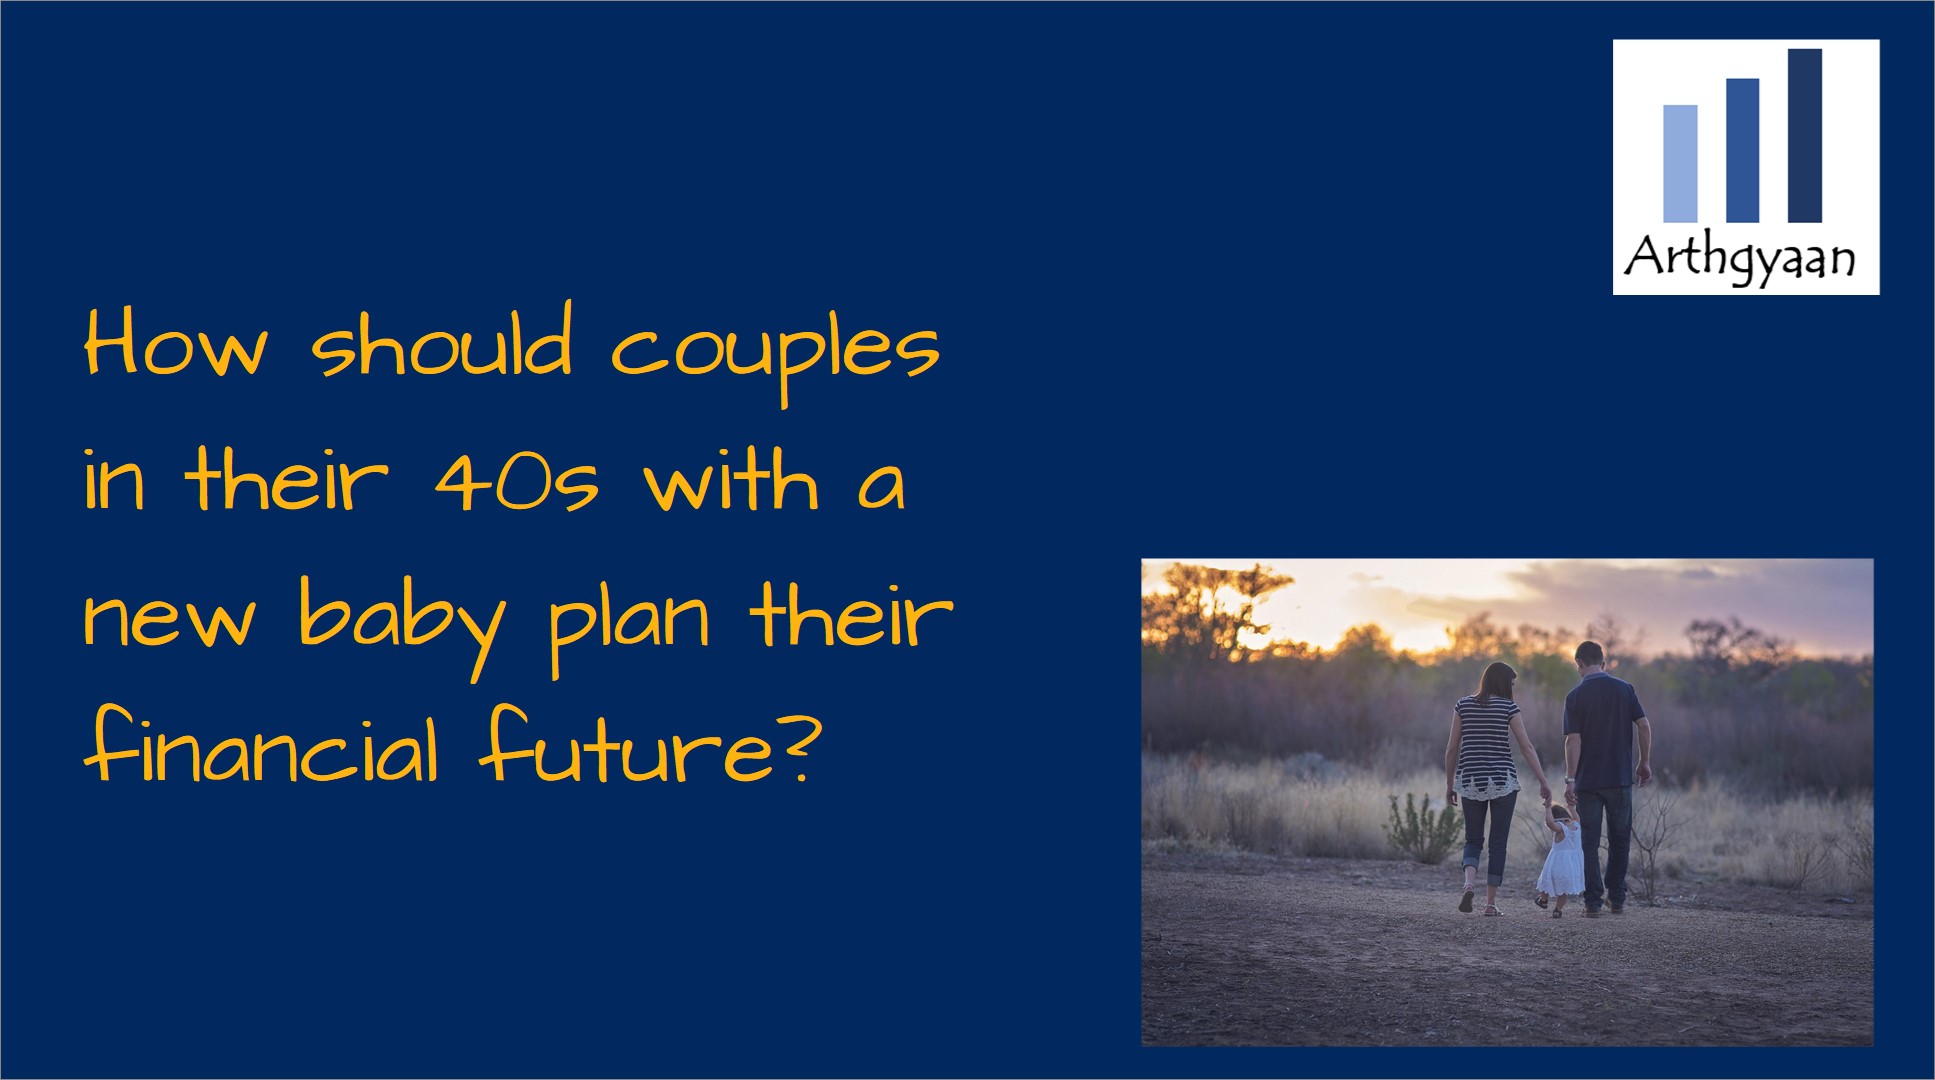 How should couples in their 40s with a new baby plan their financial future?